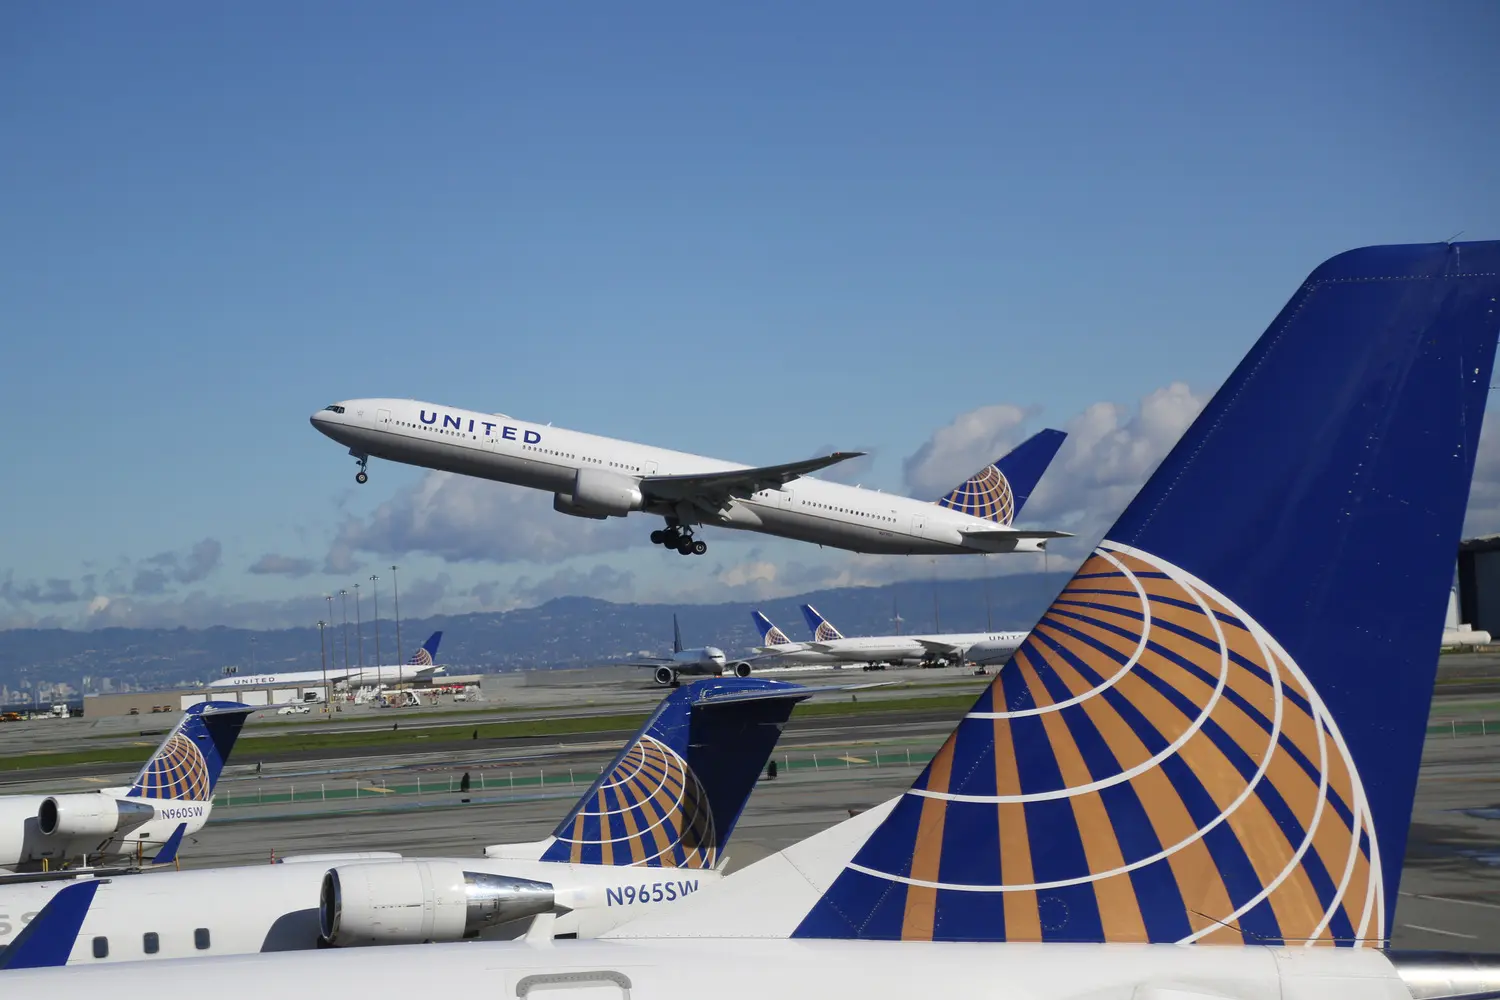 Get 25% back for United Inflight Purchases